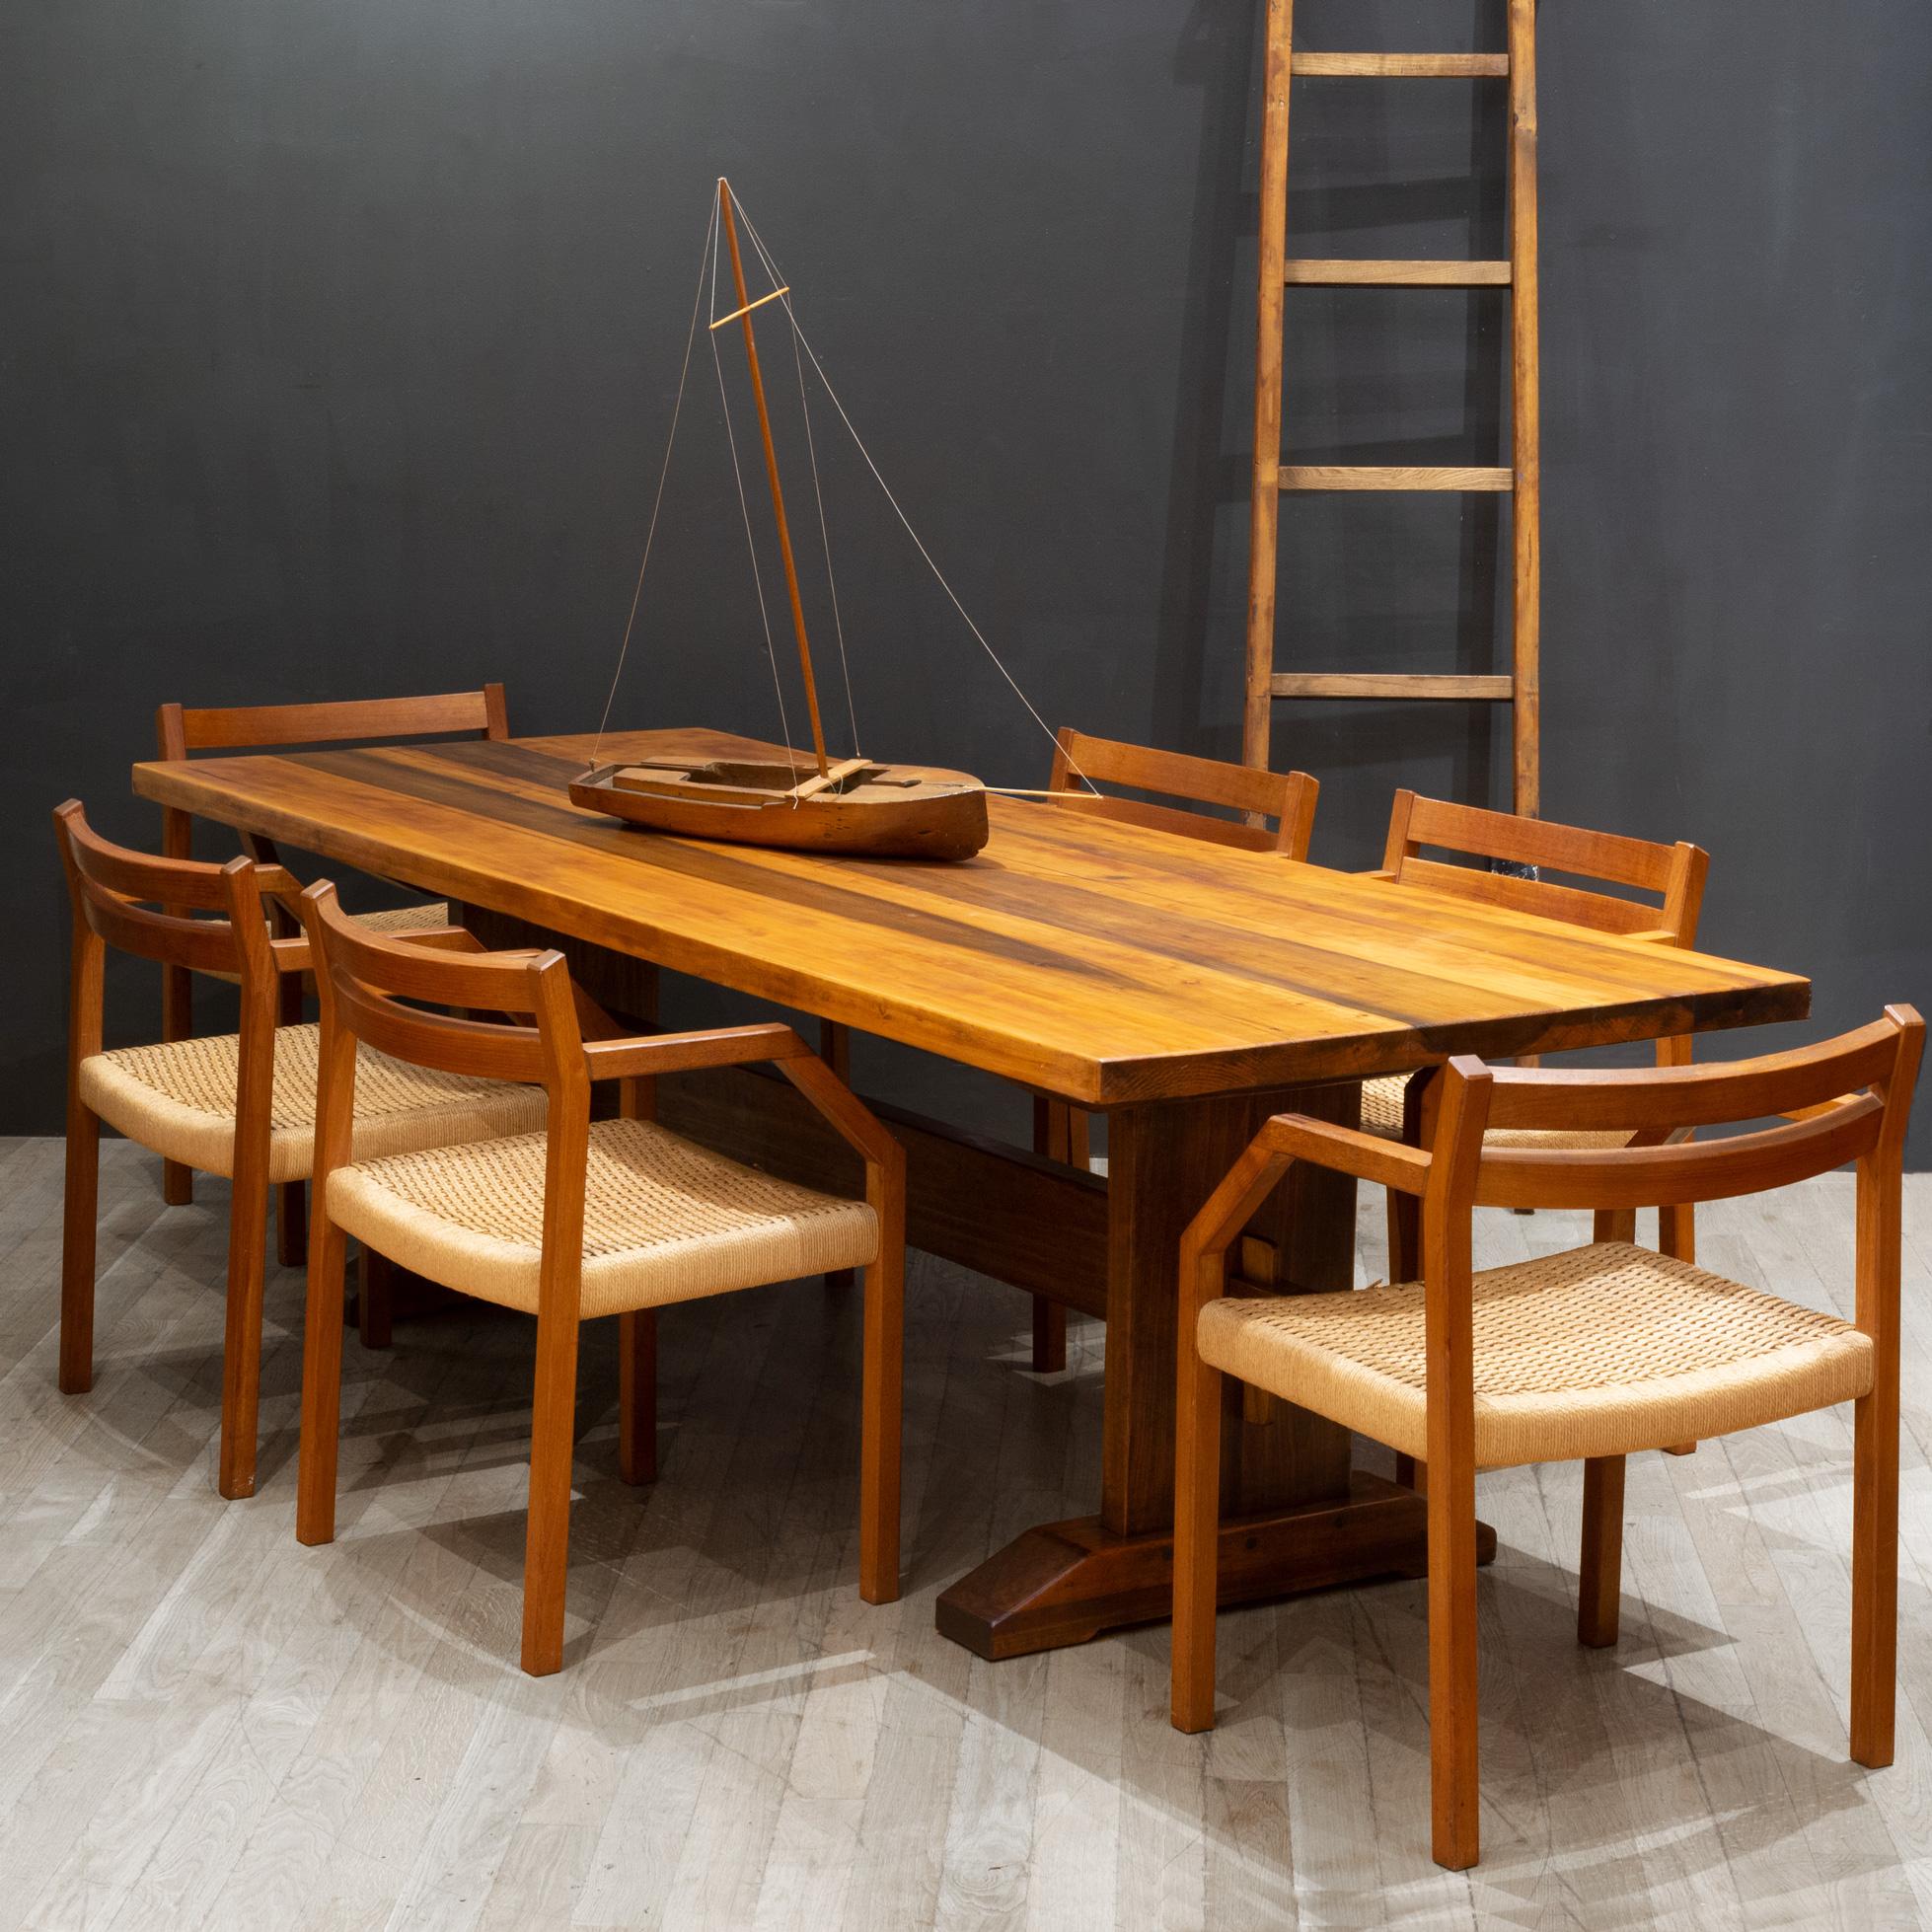 ABOUT

Contact us for more shipping options: S16 Home San Francisco. 

A set of six rare J.L. Moller Model #404 armchairs, designed in 1974 by Jorgen Henrik Moller for J.L. Moller Mobelfabrik of Denmark. The chairs are crafted of solid teak and